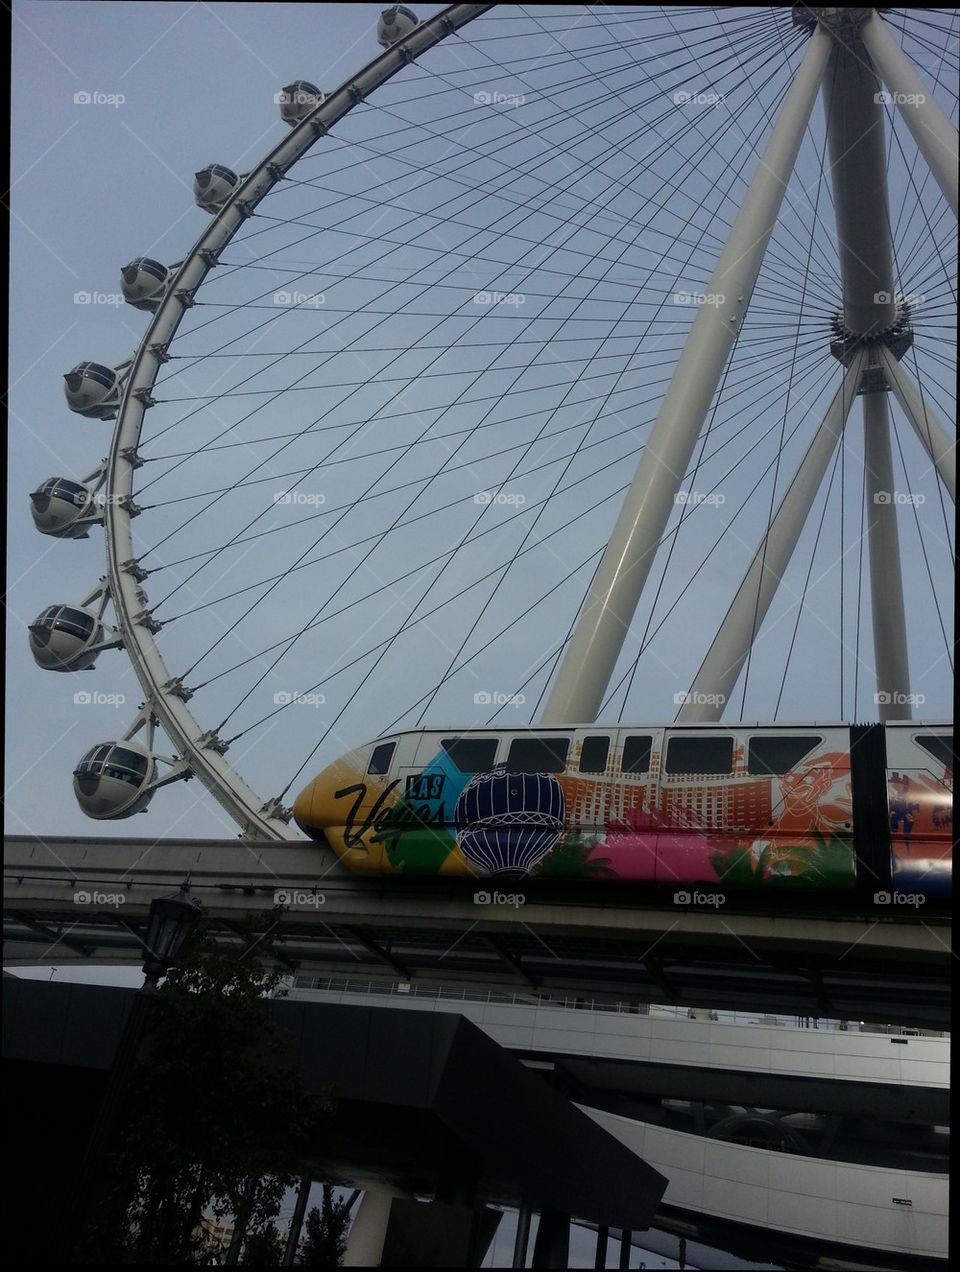 Las Vegas observation wheel and monorail